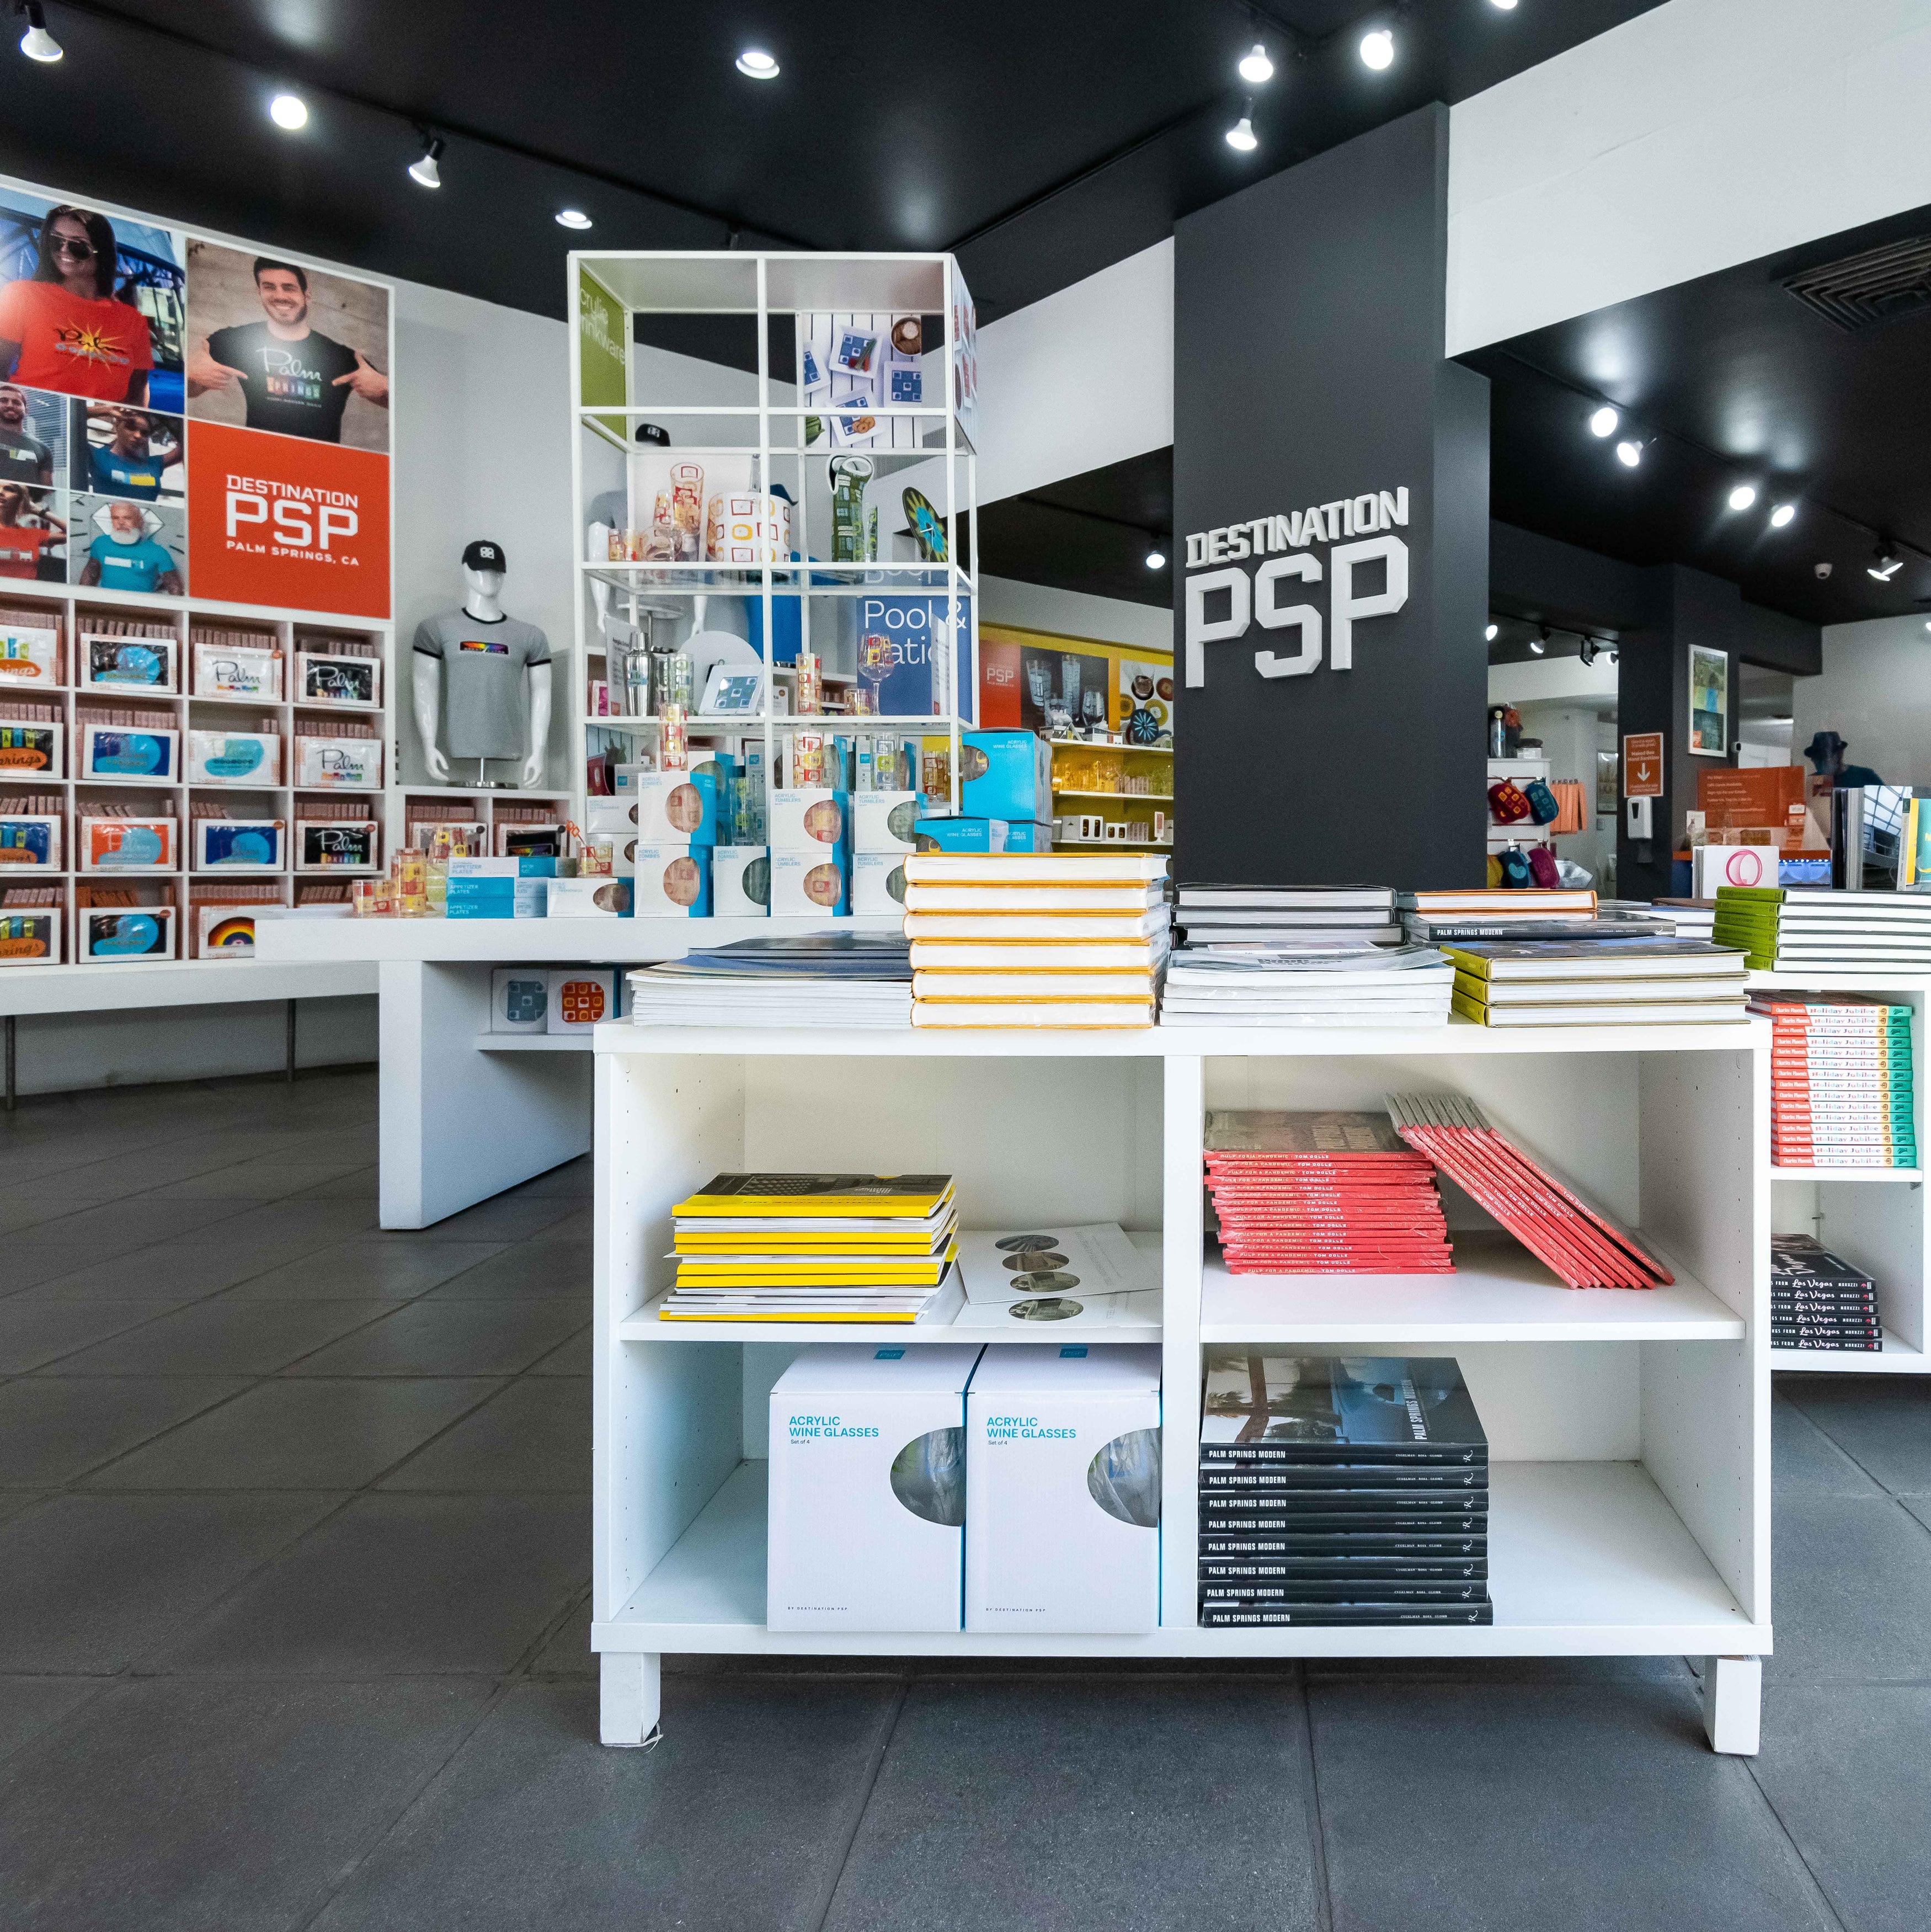 Interior of the Palm Springs retail store, Destination PSP, showcasing shelves brimming with books, t-shirts, and art pieces, complemented by a mannequin displaying store apparel.